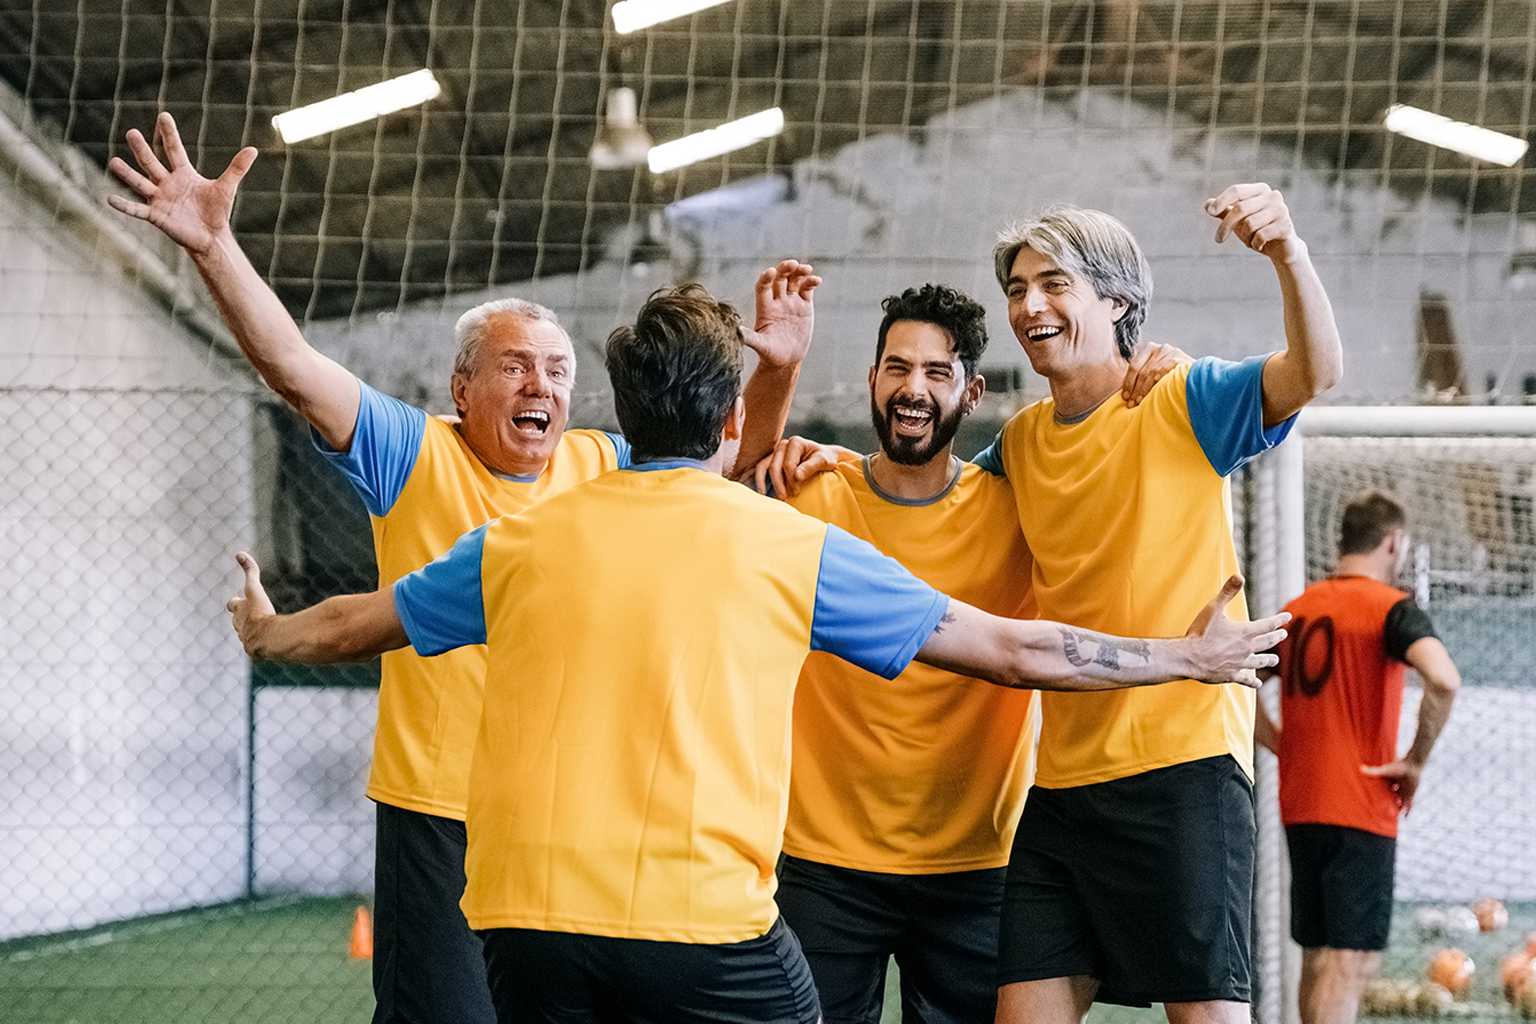 A group of men celebrate on an indoor sport field